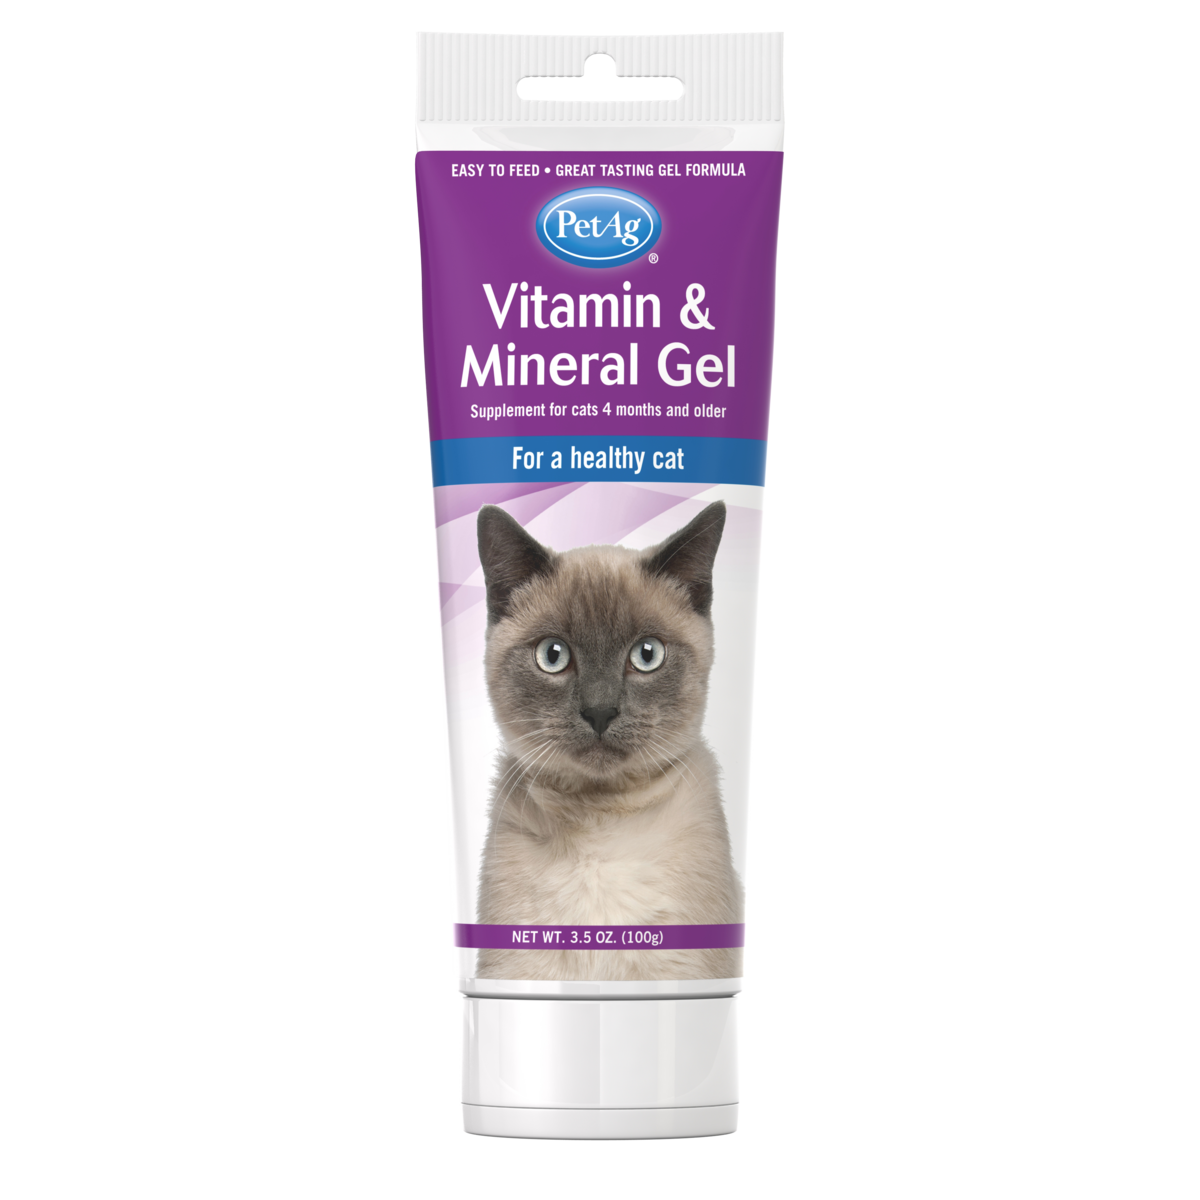 PetAg Vitamin & Mineral Gel Supplement for Cats